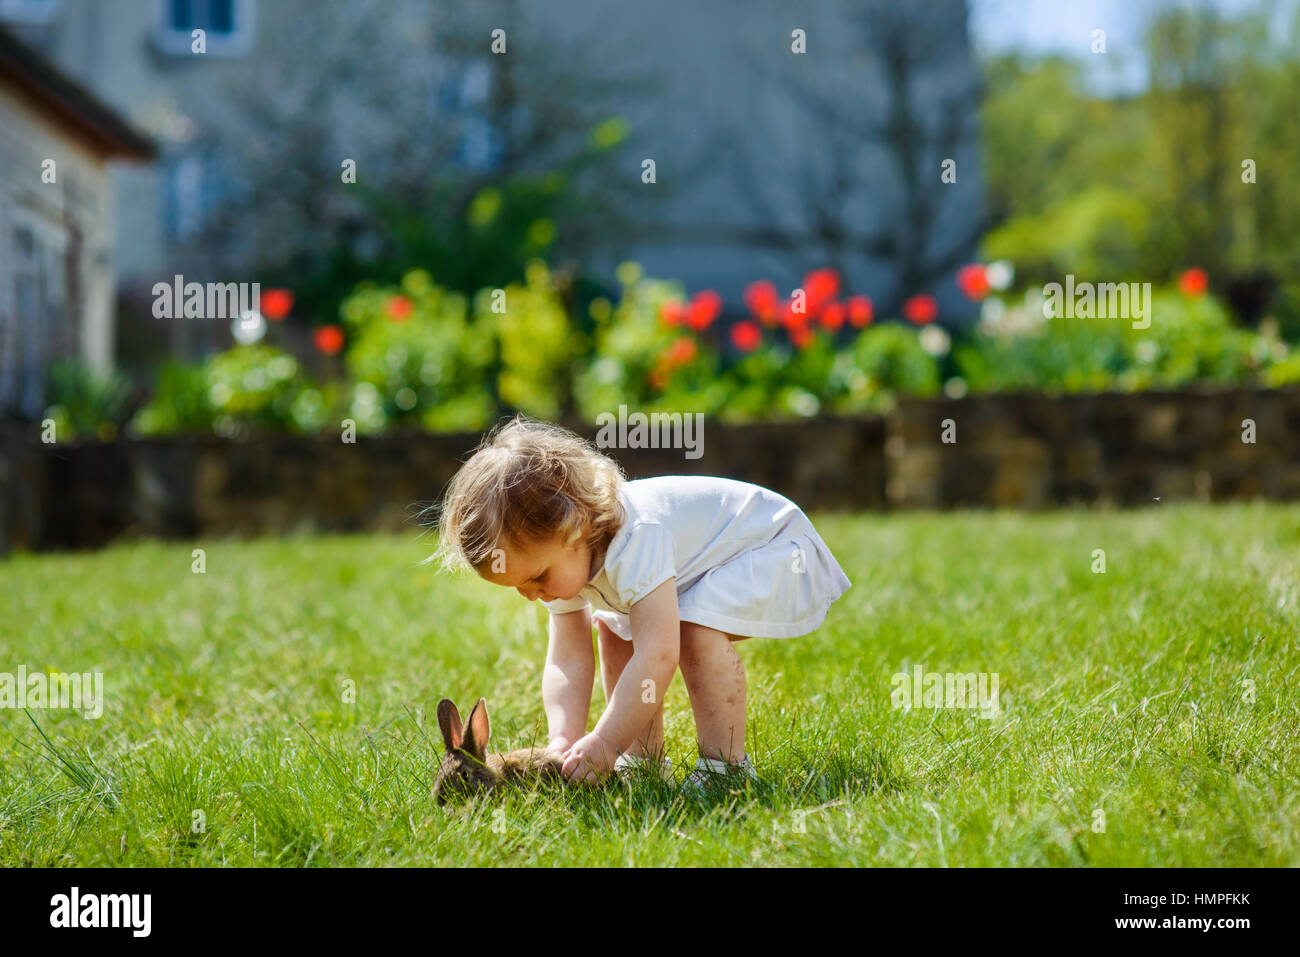 child with a rabbit Stock Photo